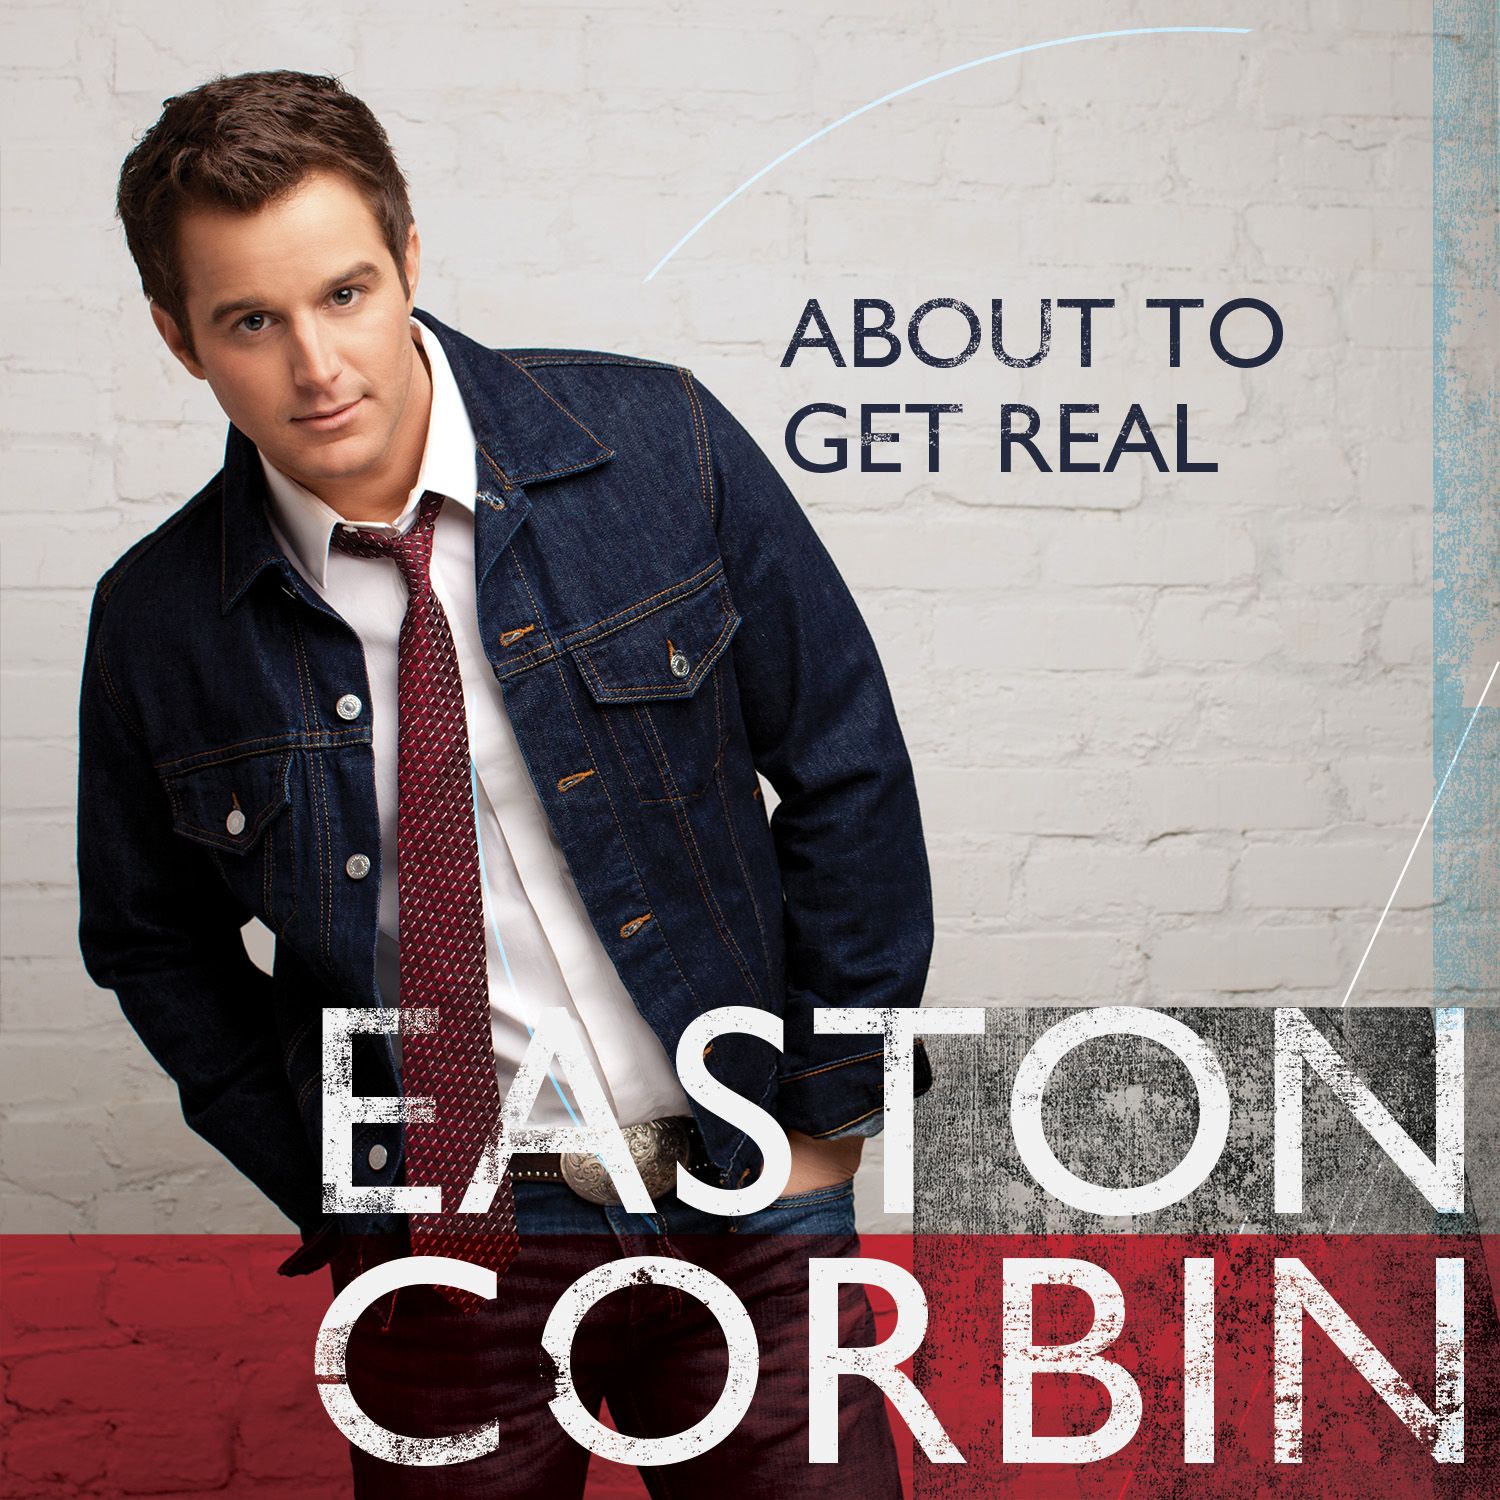 EASTON CORBIN TO RELEASE THIRD ALBUM ABOUT TO GET REAL